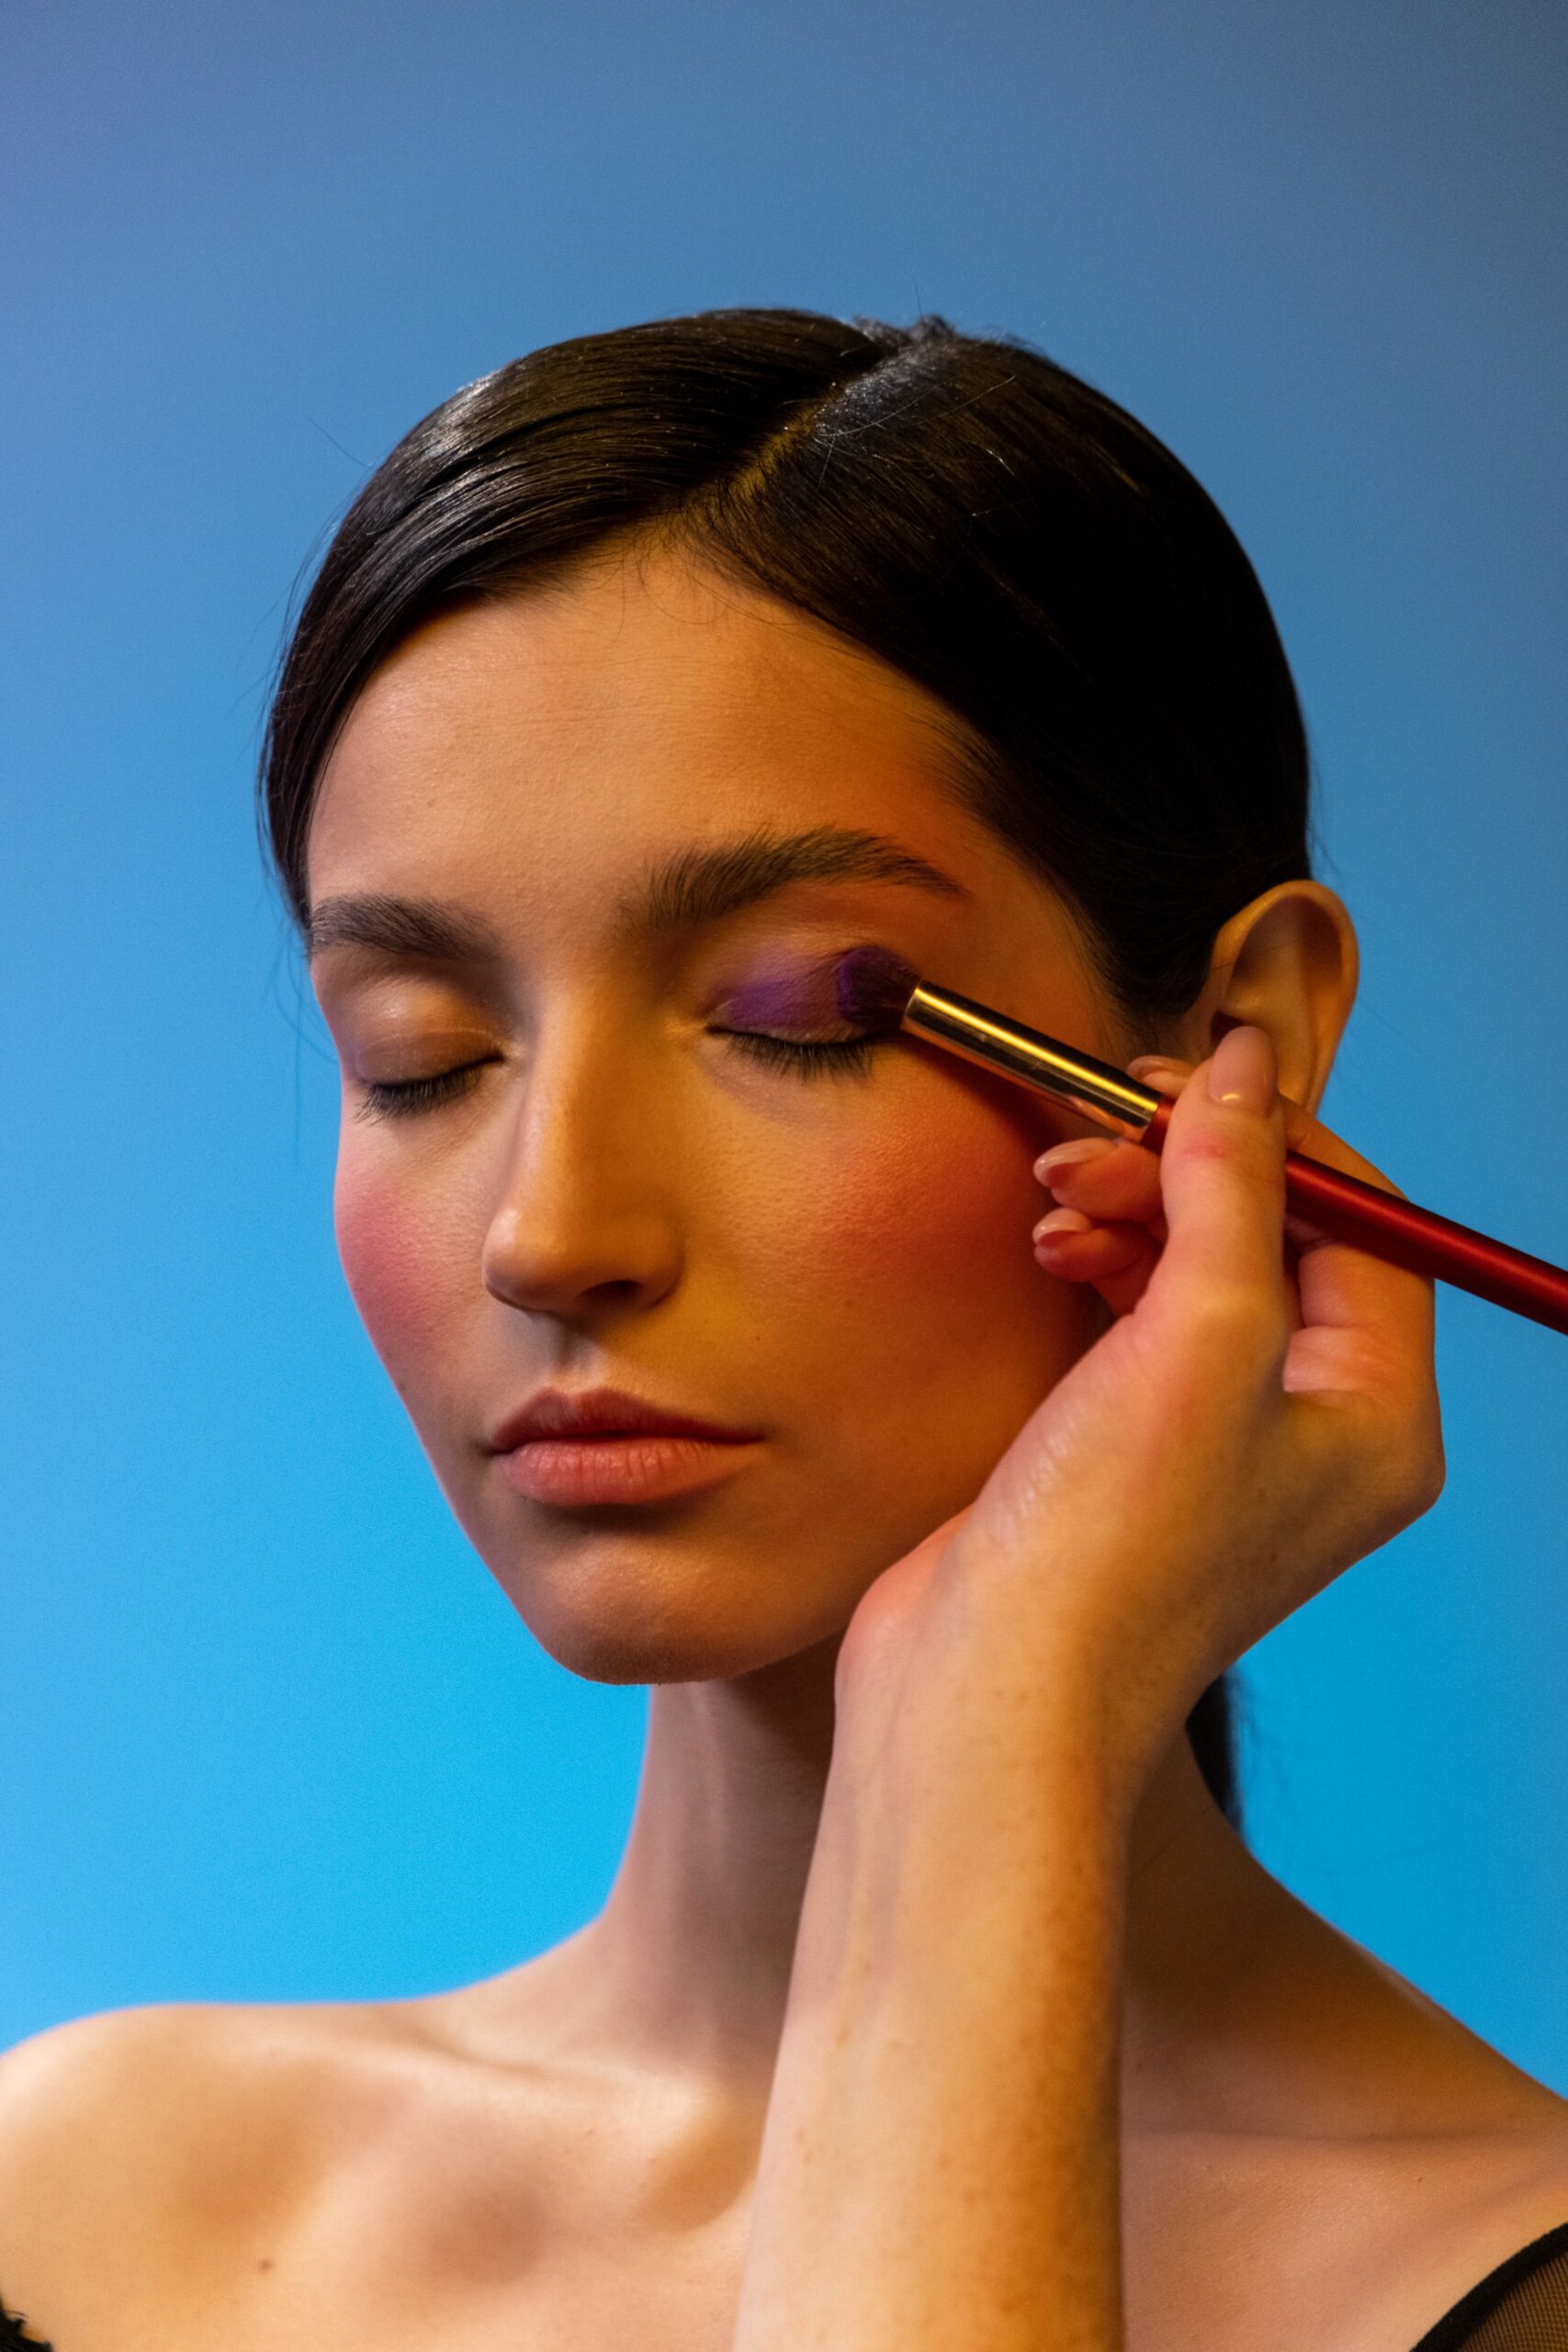 A hand applying makeup on a model image